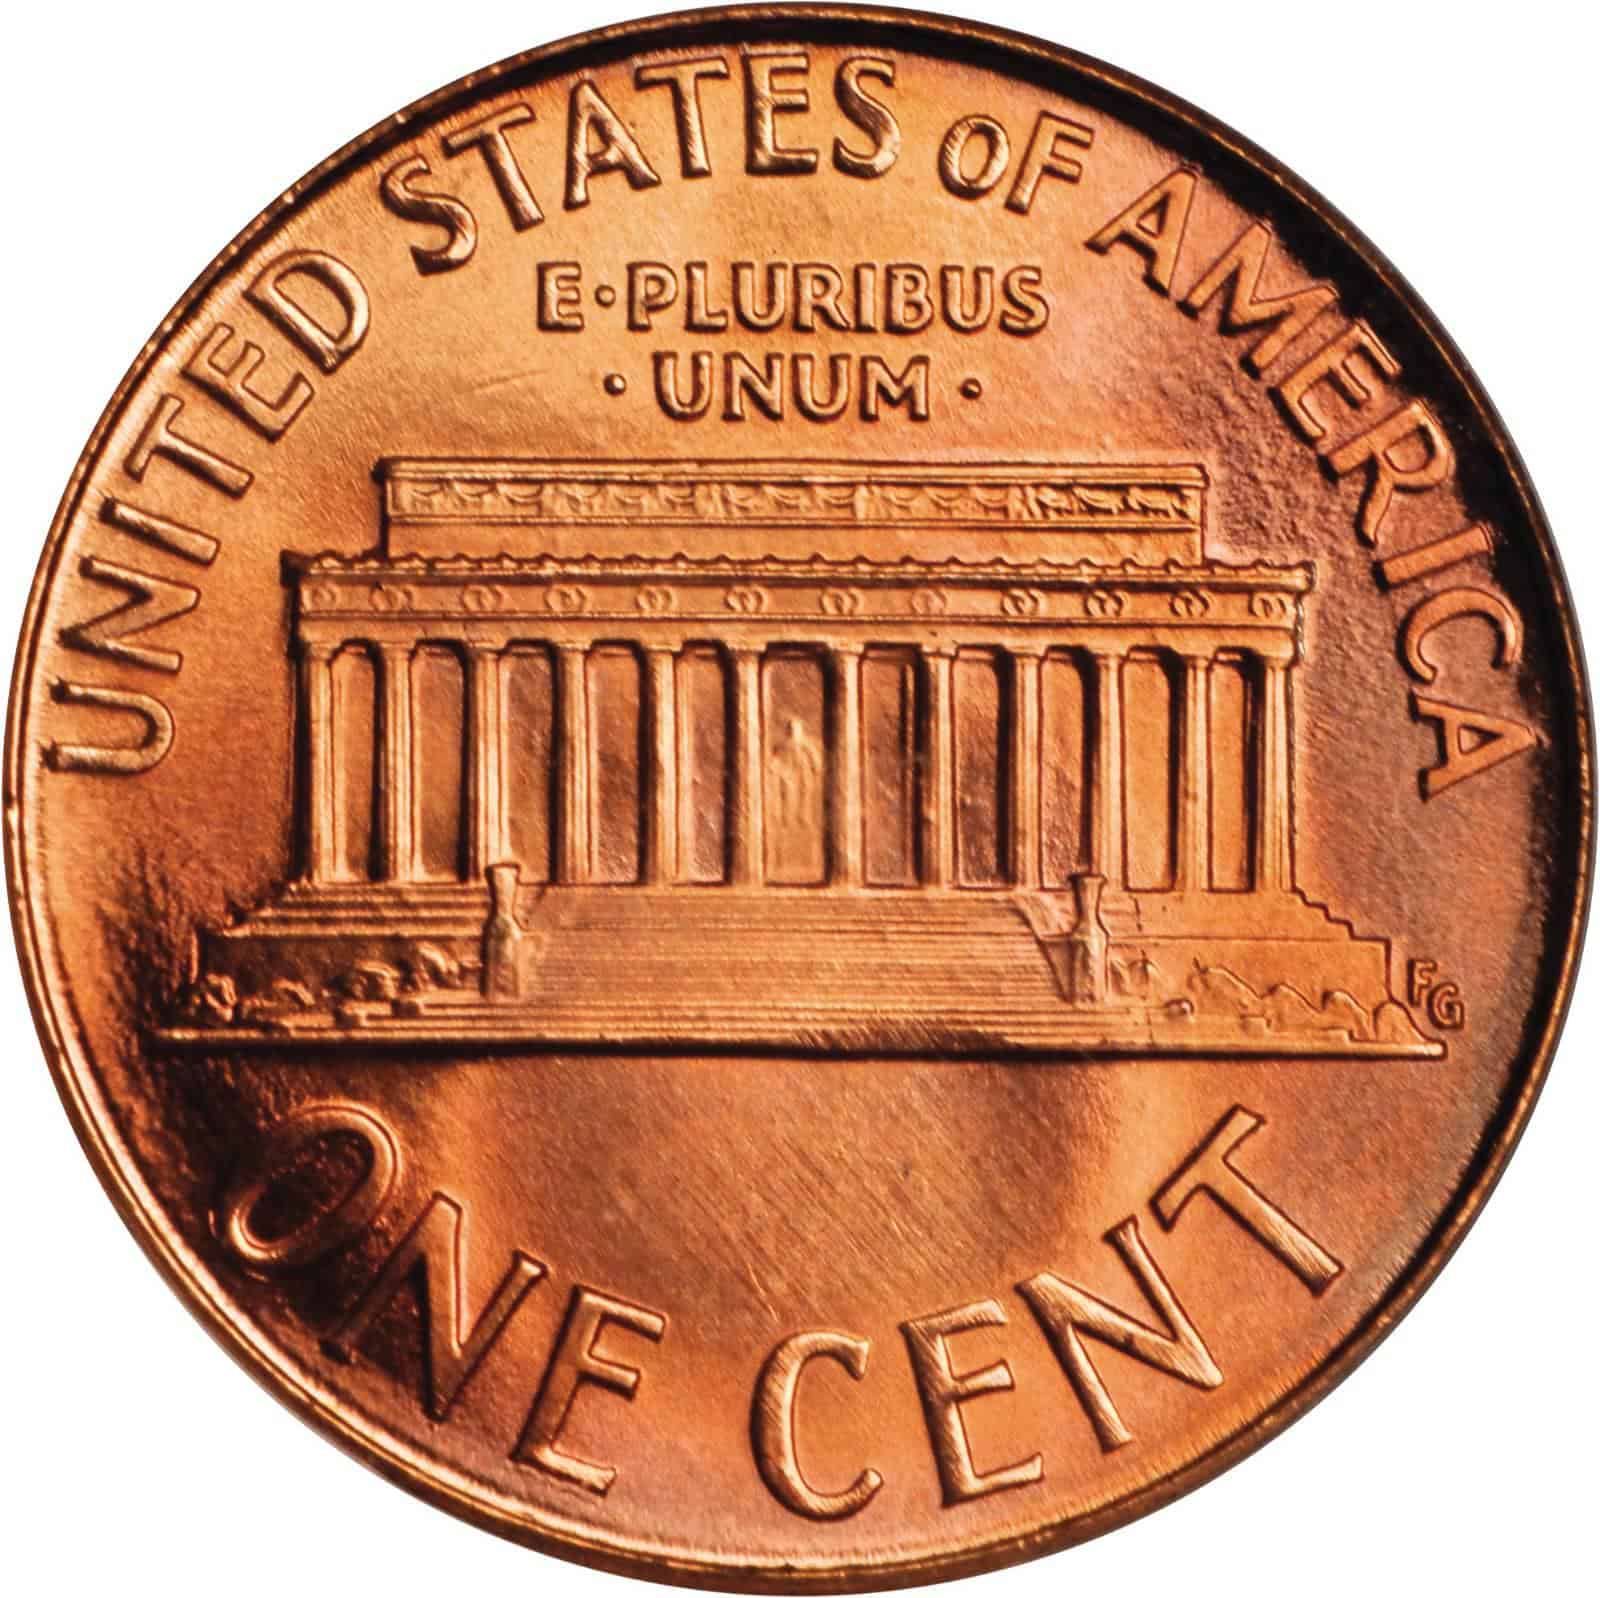 The Reverse of the 1989 Penny